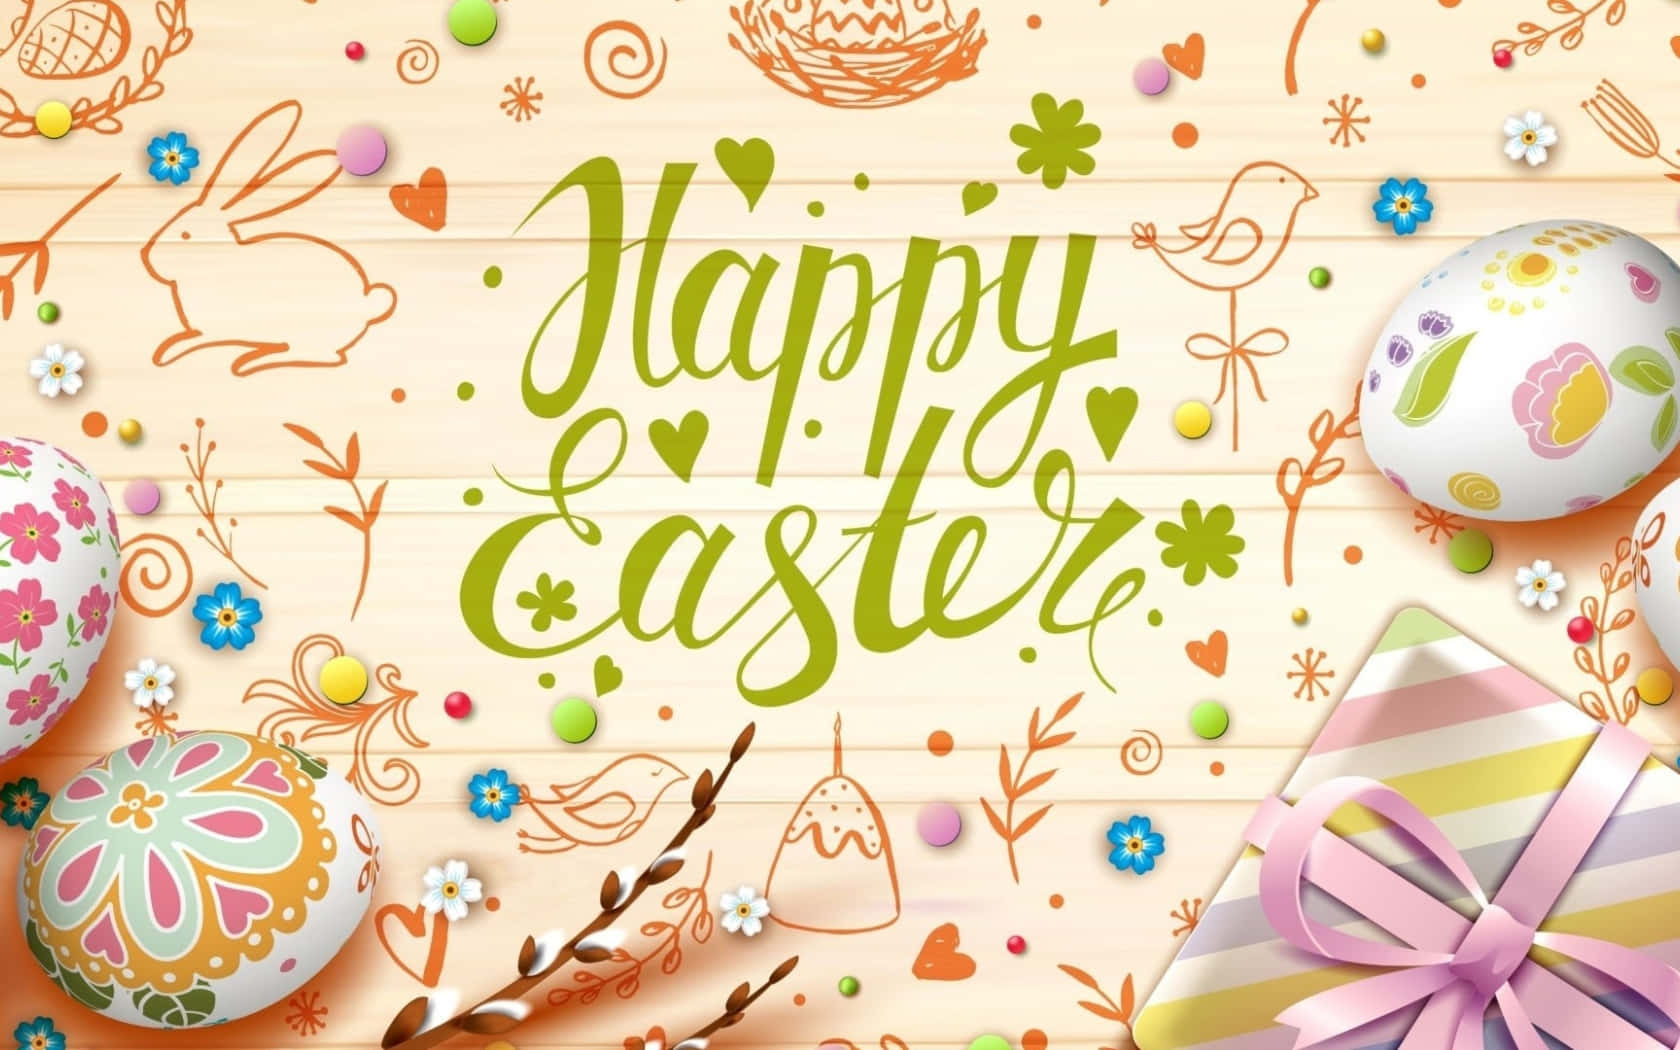 100+] Cute Happy Easter Wallpapers